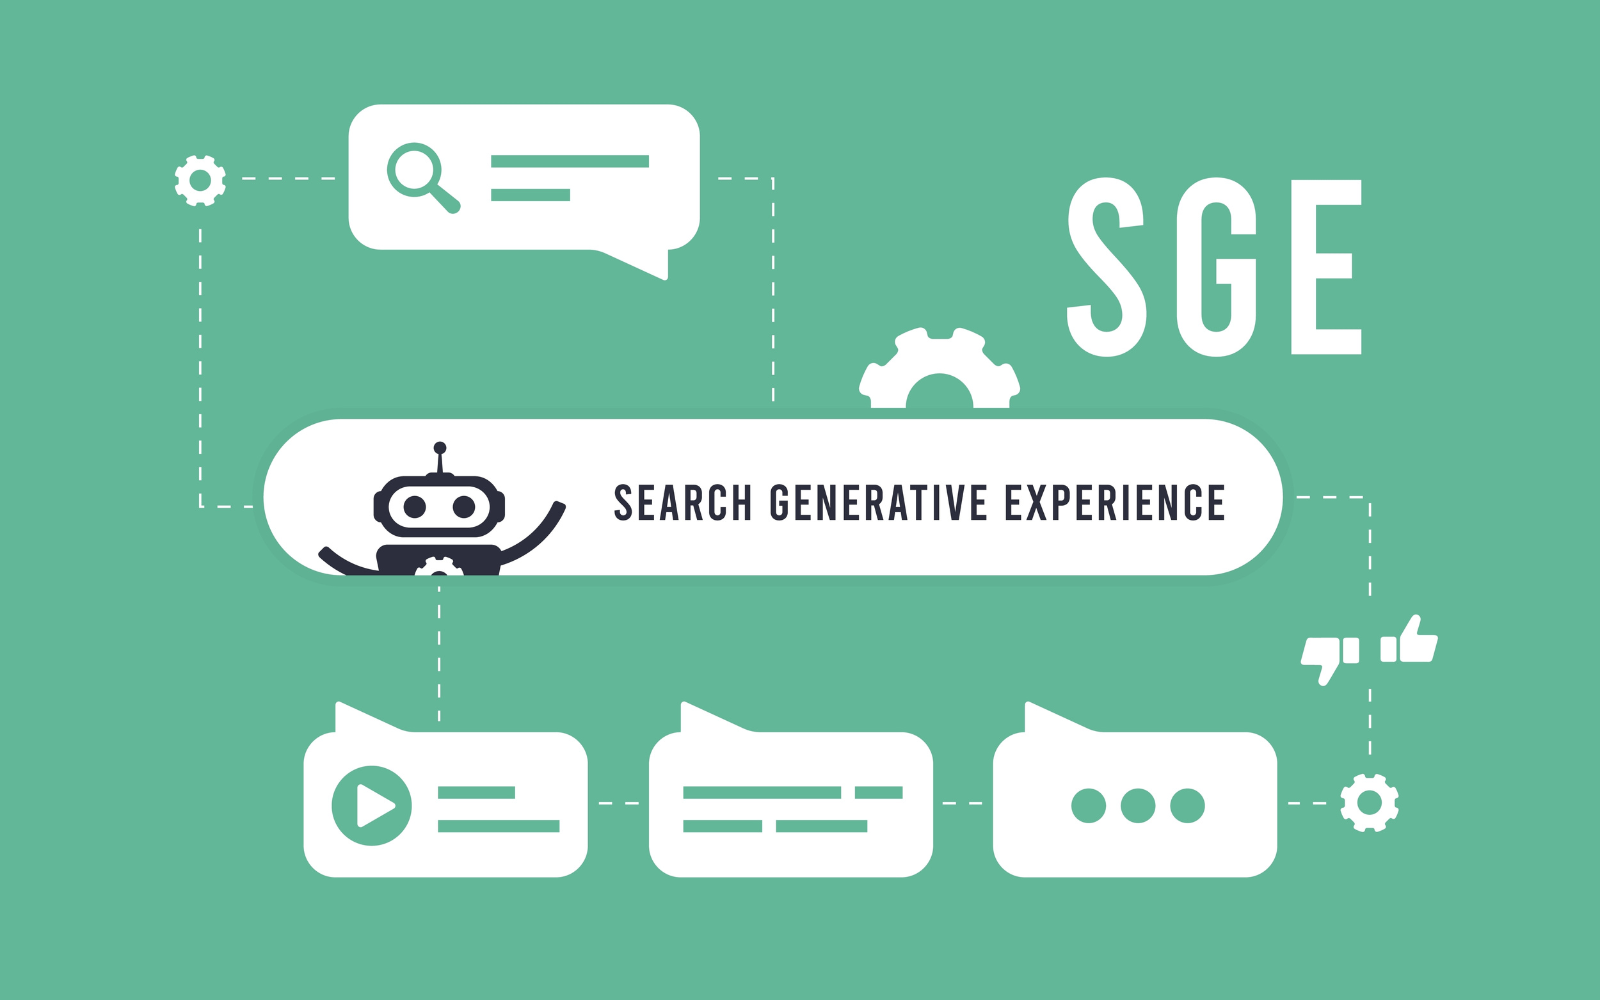 How To Adapt SEO Strategies To Better Appear In Google SGE via @sejournal, @adrianakstein